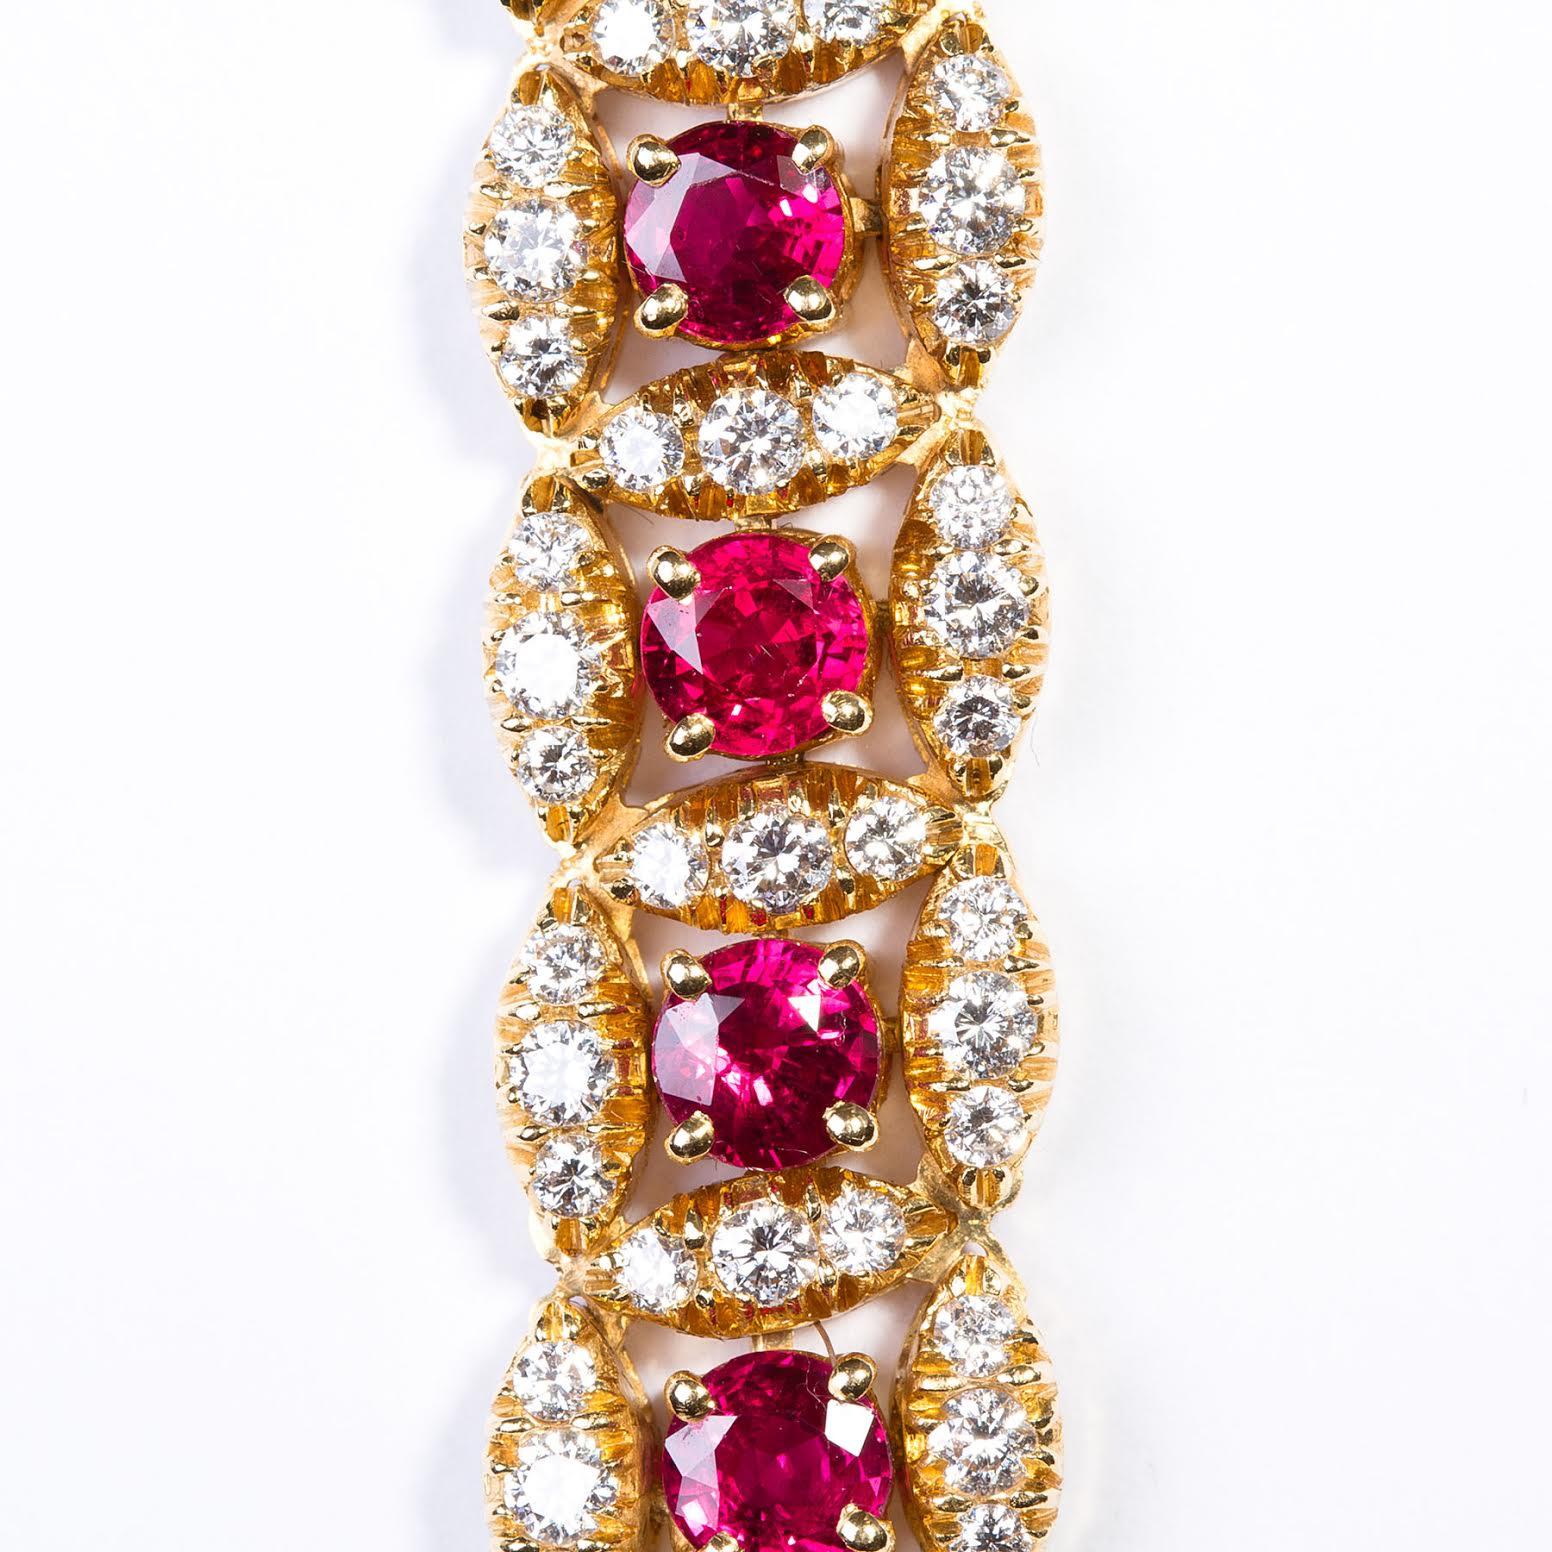 Beautiful Original Oscar Heyman ruby and diamond bracelet circa 1980s crafted in 18k yellow gold. This unique and beautifully crafted bracelet showcases 22 crimson red ruby’s weighing approximately 12.1 carats total surrounded by 198 round brilliant